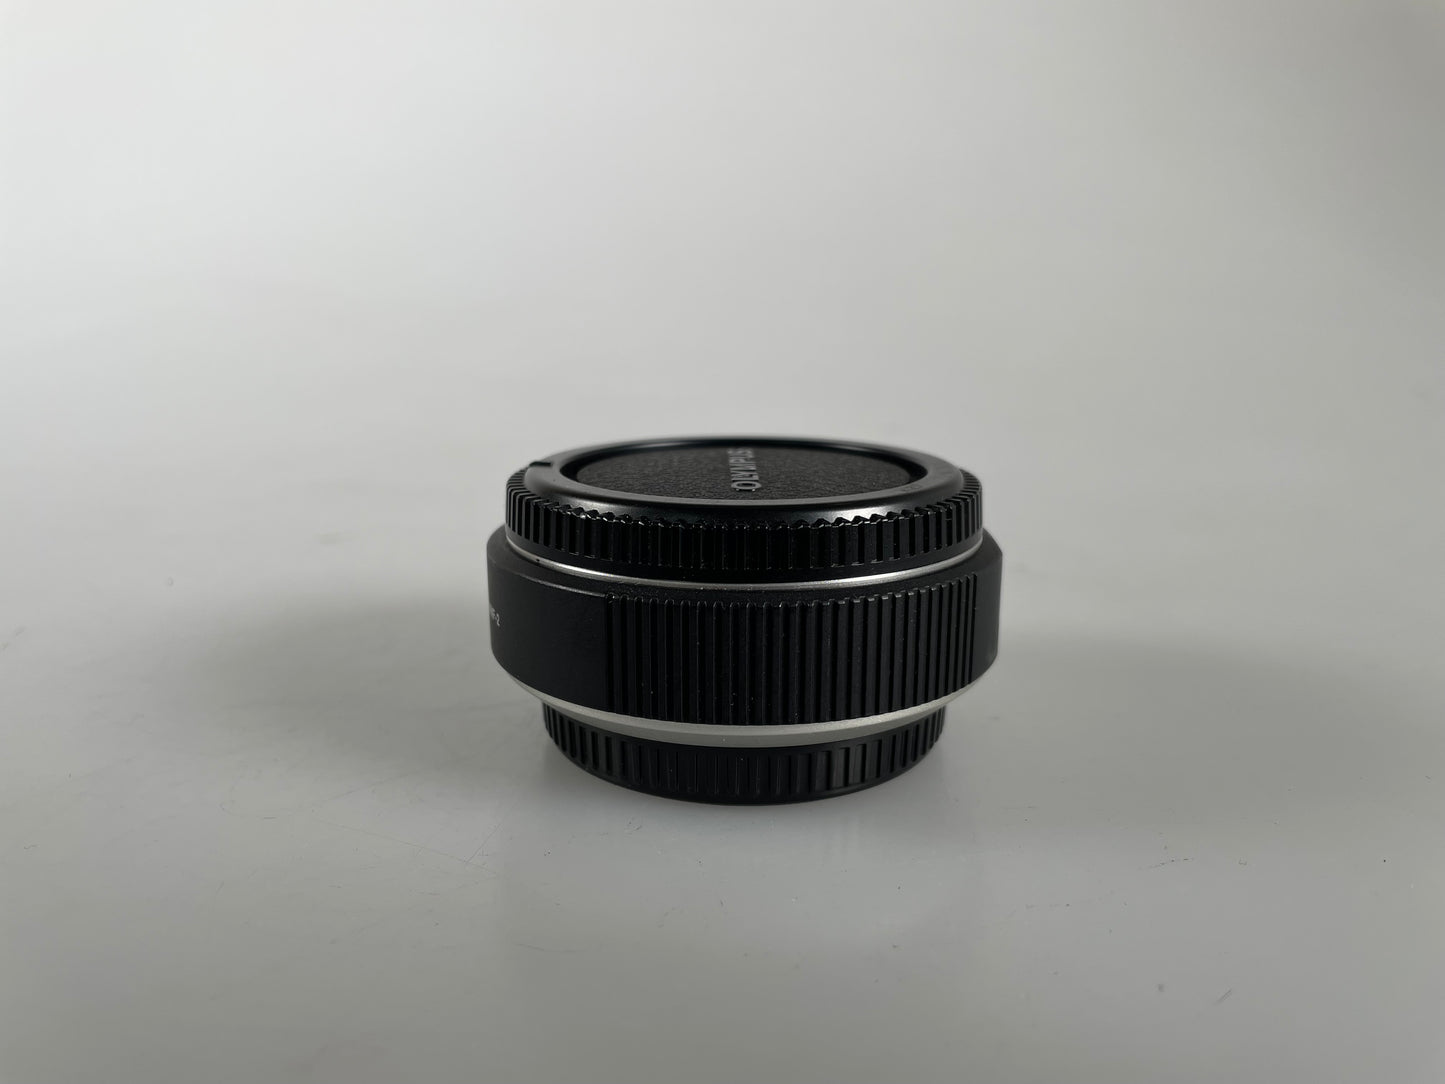 Olympus MMF-2 Four Thirds to MFT Lens Mount Adapter Micro 4/3